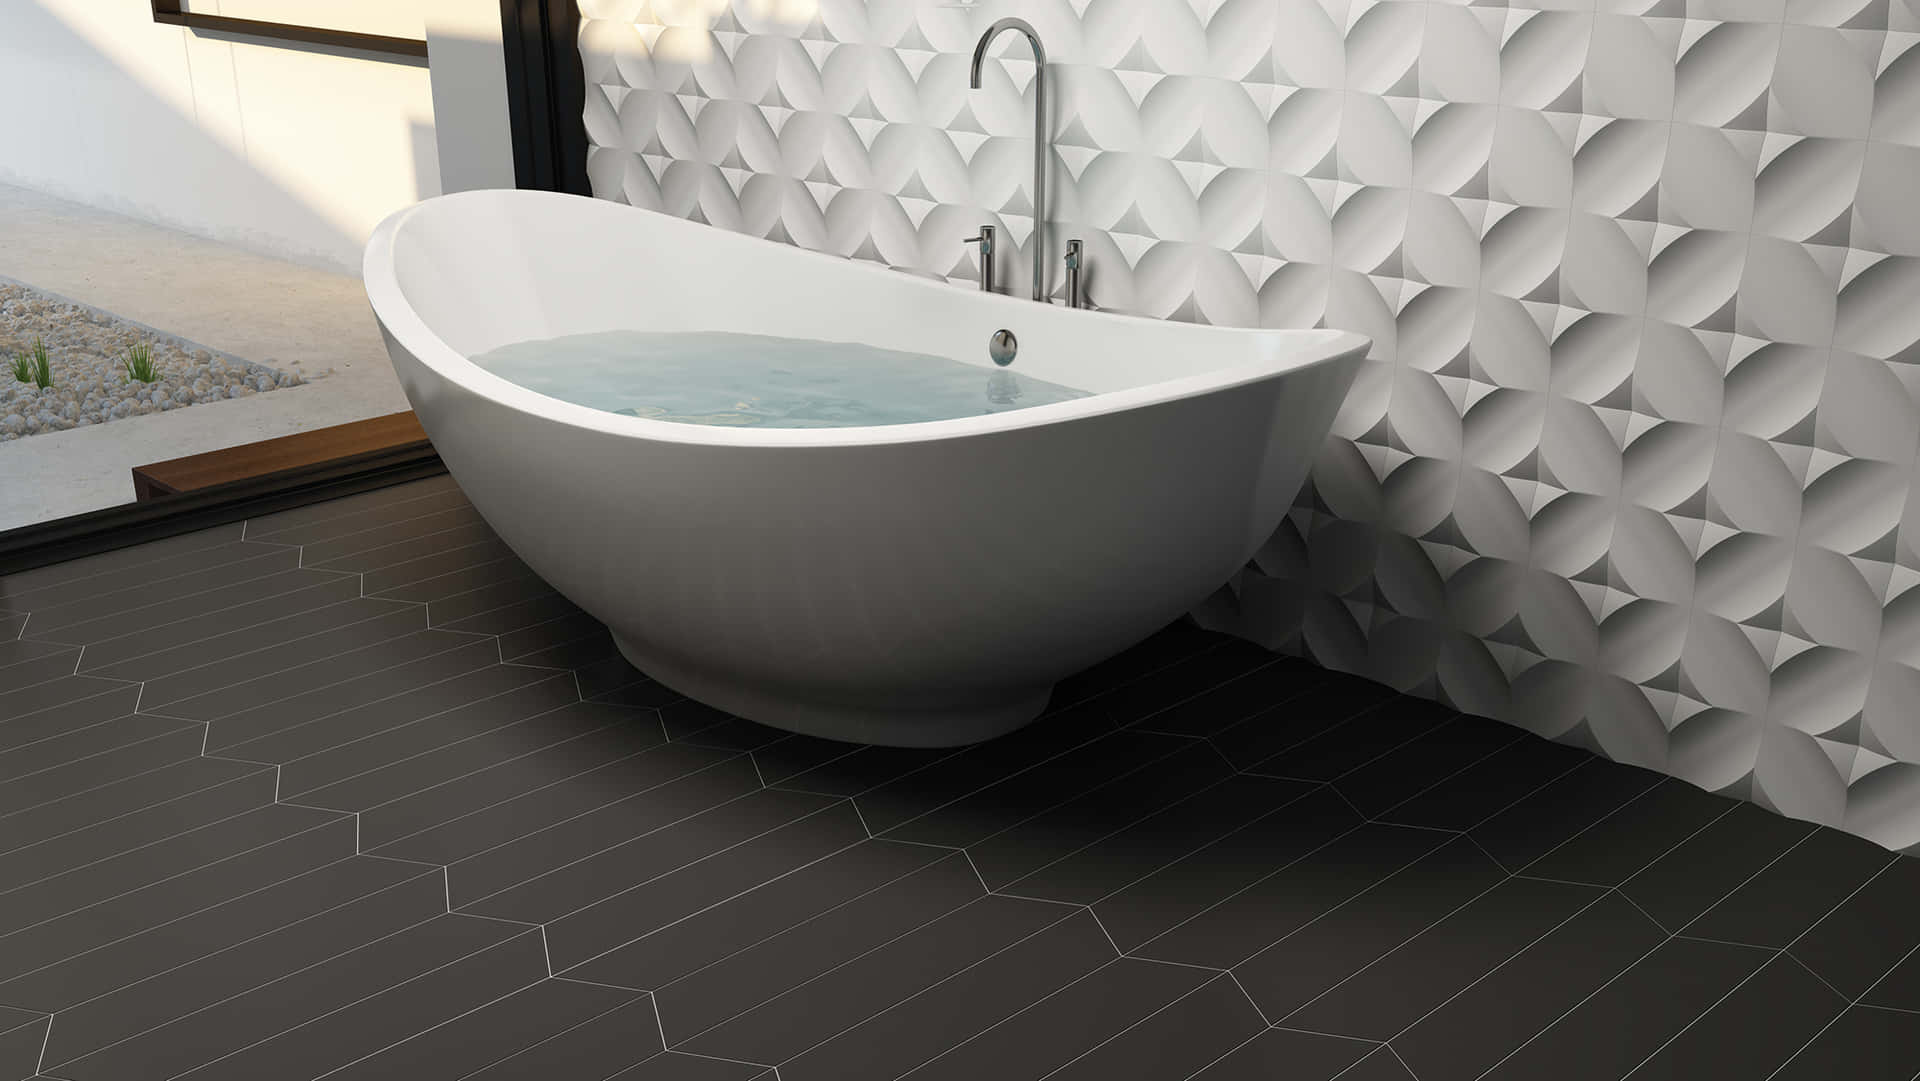 Embellish Your Home with Quality Tile